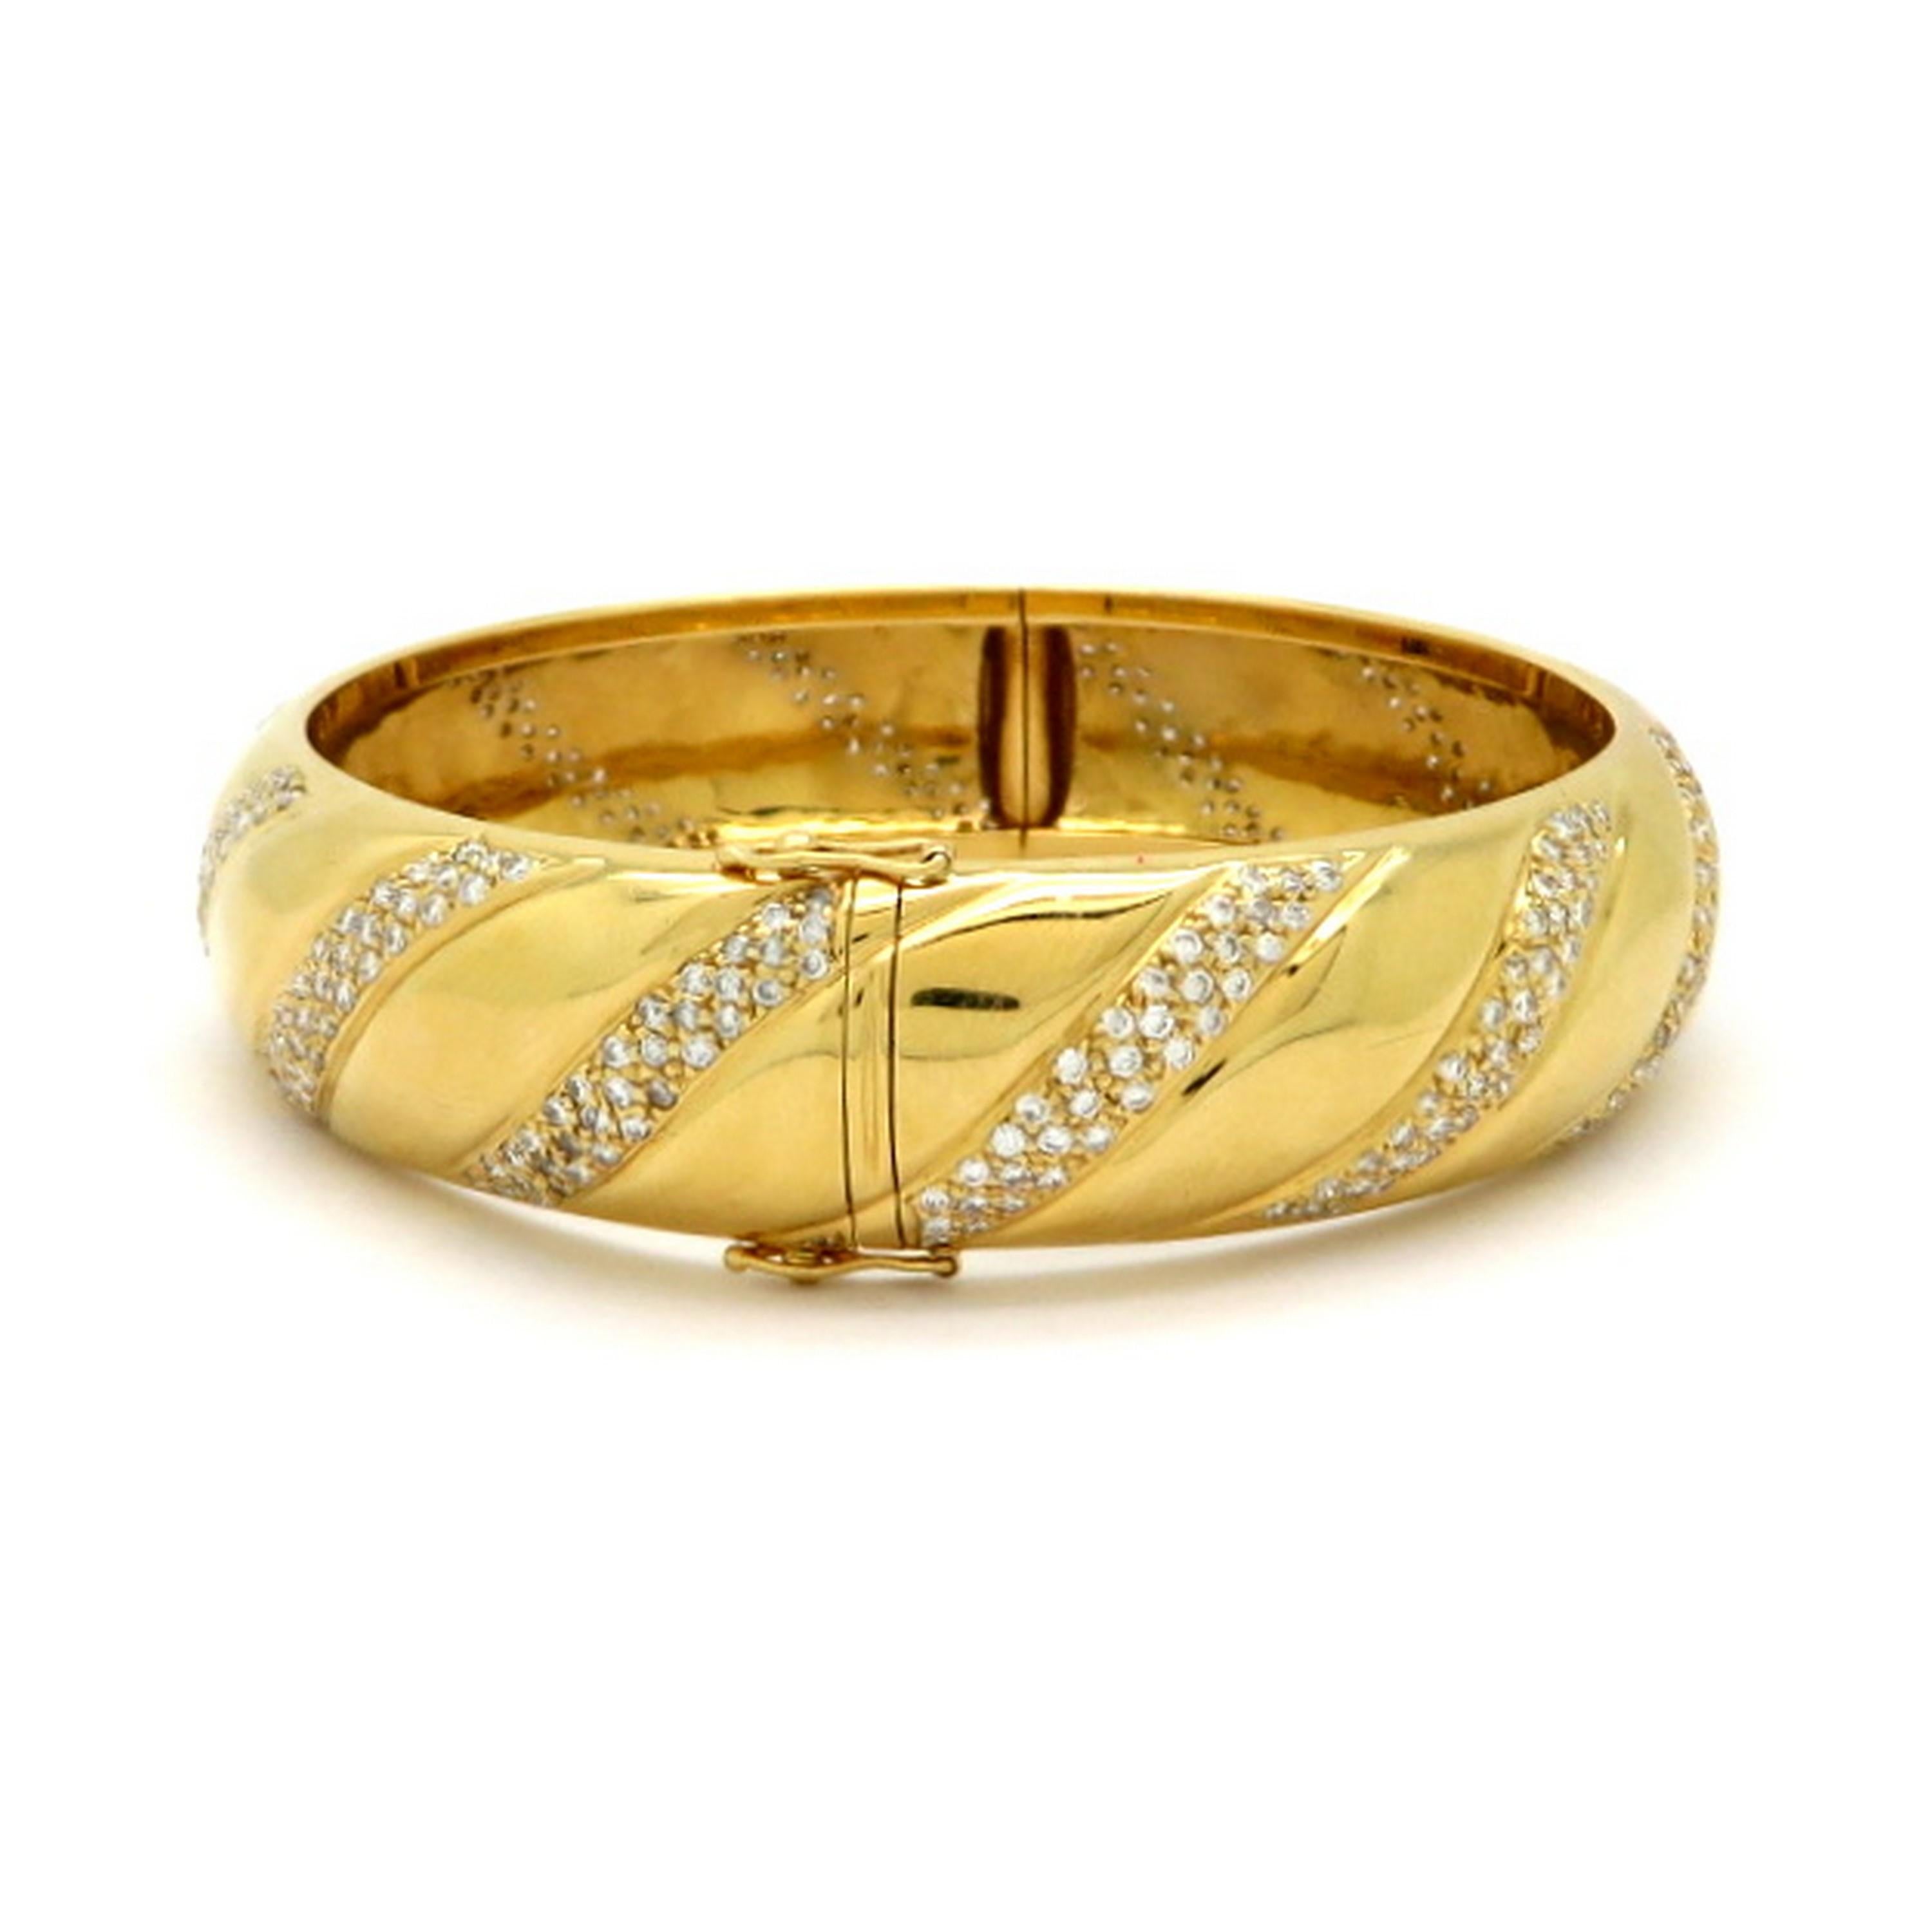 Estate 18K yellow gold round diamond twist swirl bangle fashion bracelet. Accented with 430 bead set round brilliant cut diamonds weighing a combined total of approximately 2.25 carats. Diamond grading: color grade: G – H. Clarity grade: VS1 – VS2.